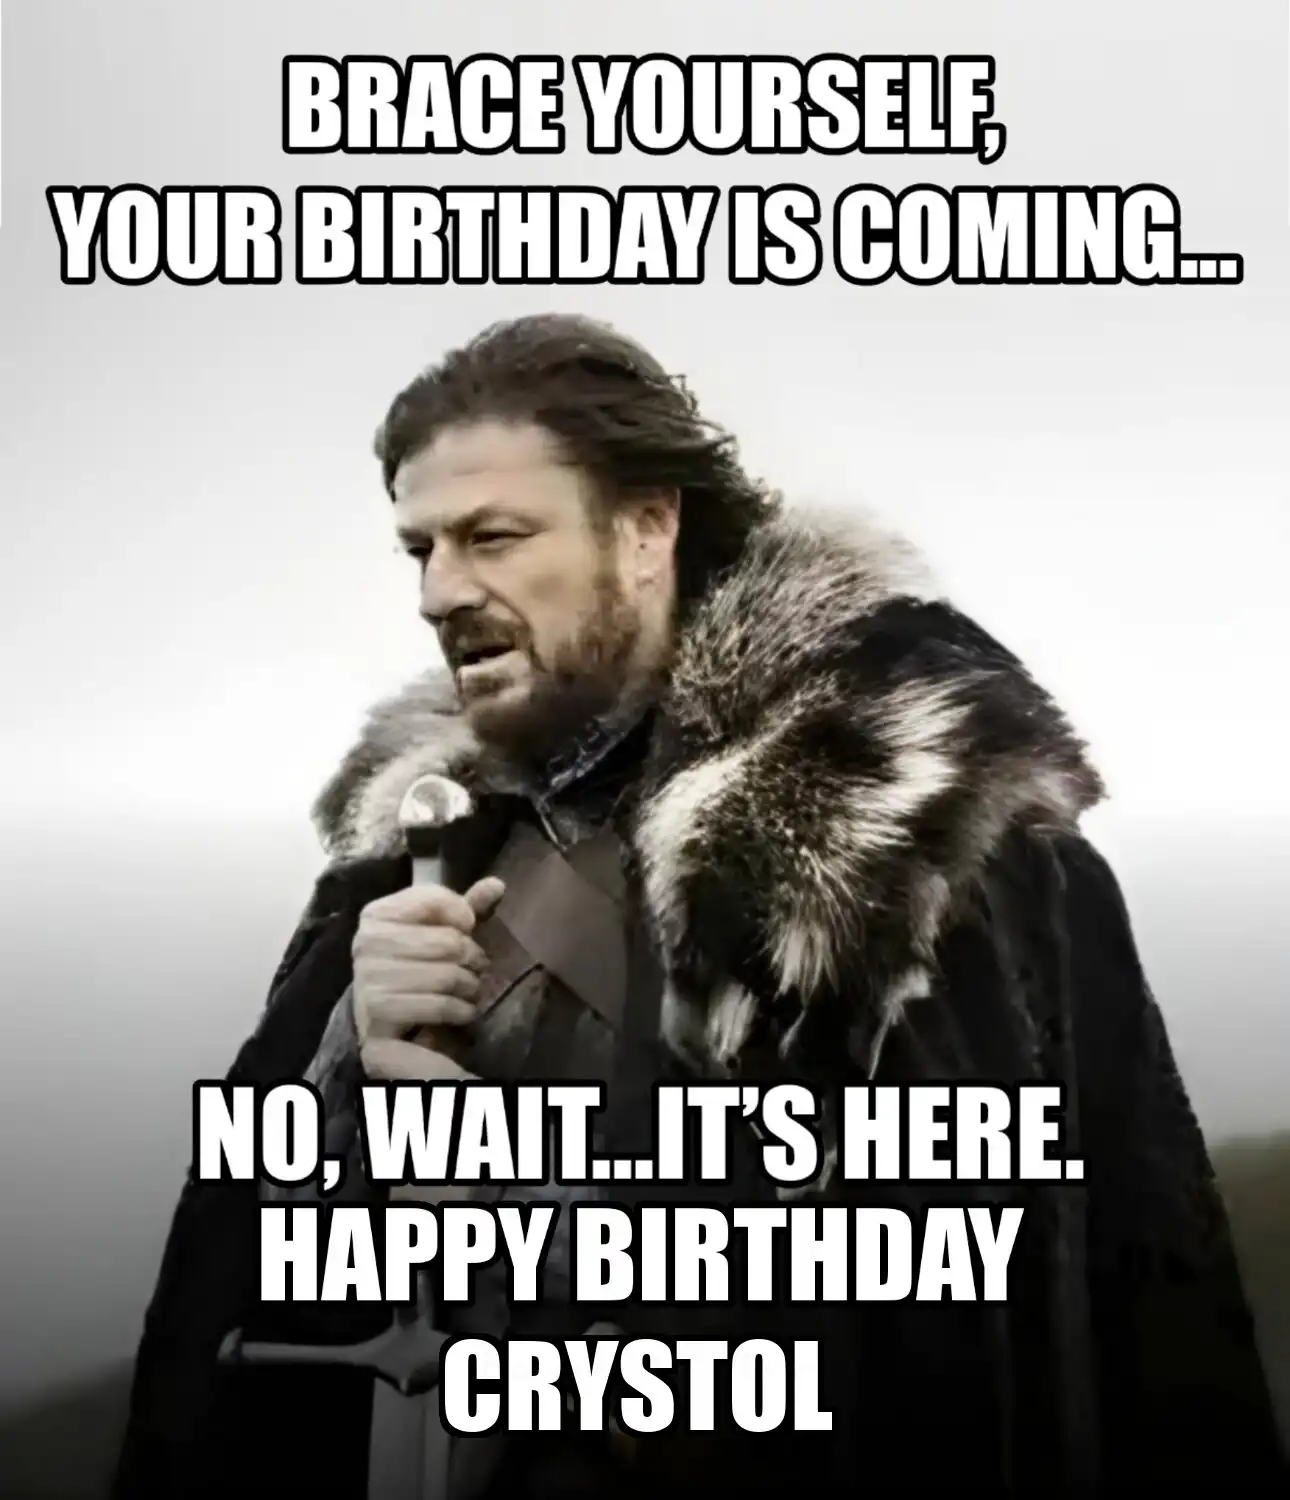 Happy Birthday Crystol Brace Yourself Your Birthday Is Coming Meme